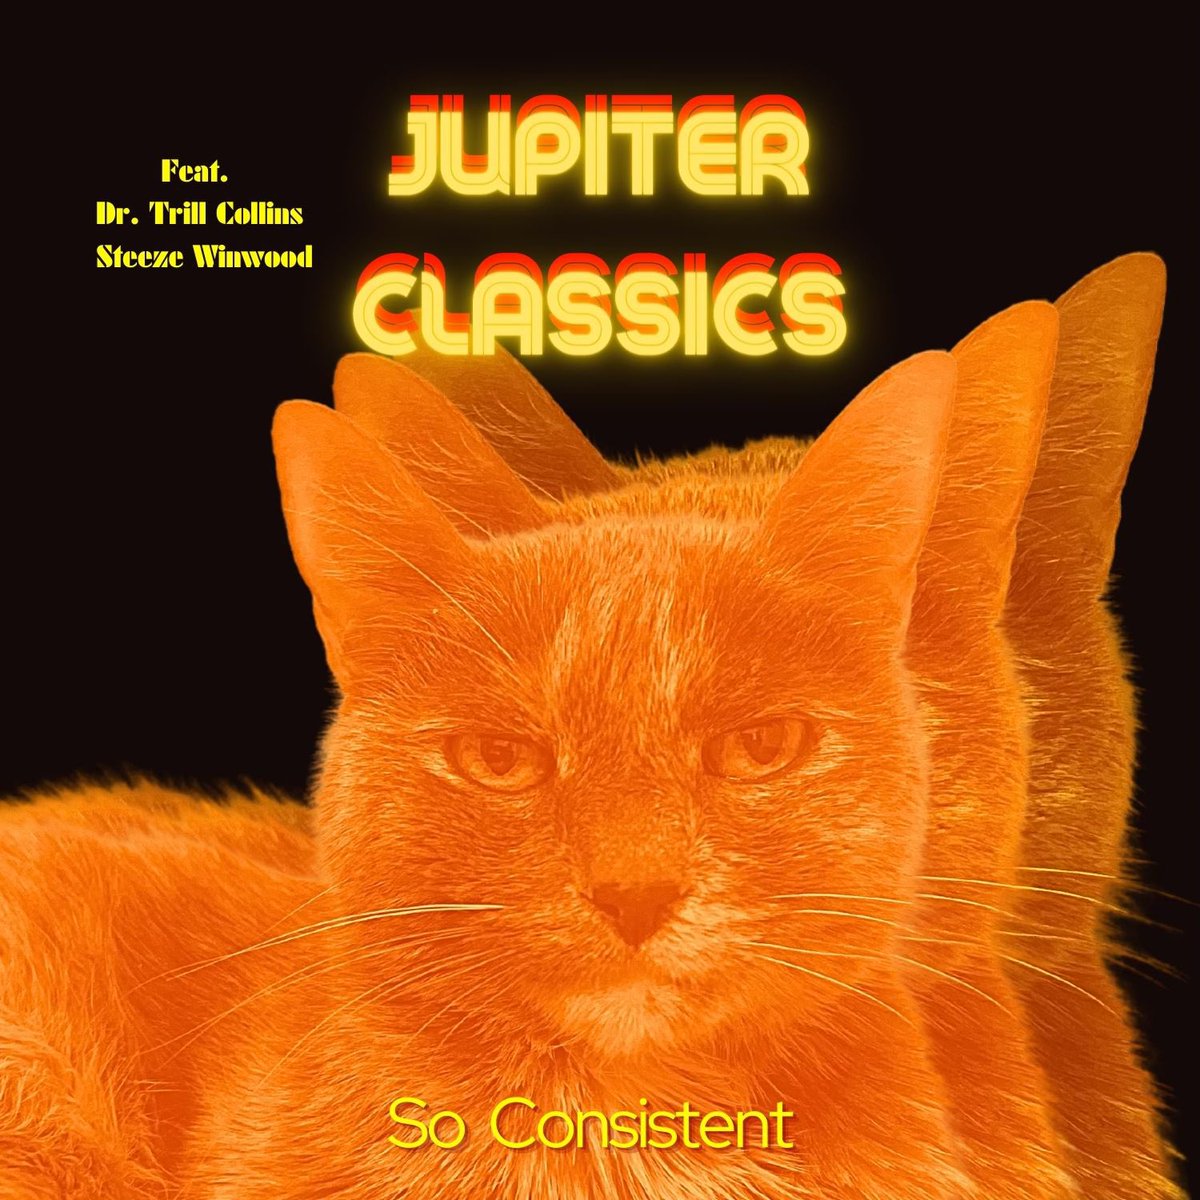 NEW MUSIC UPDATE Tomorrow Night We Here At #JupiterClassics Are Dropping Another Fantastic Rap Banger “So Consistent” GET YOU SOME #RappersDontGolf